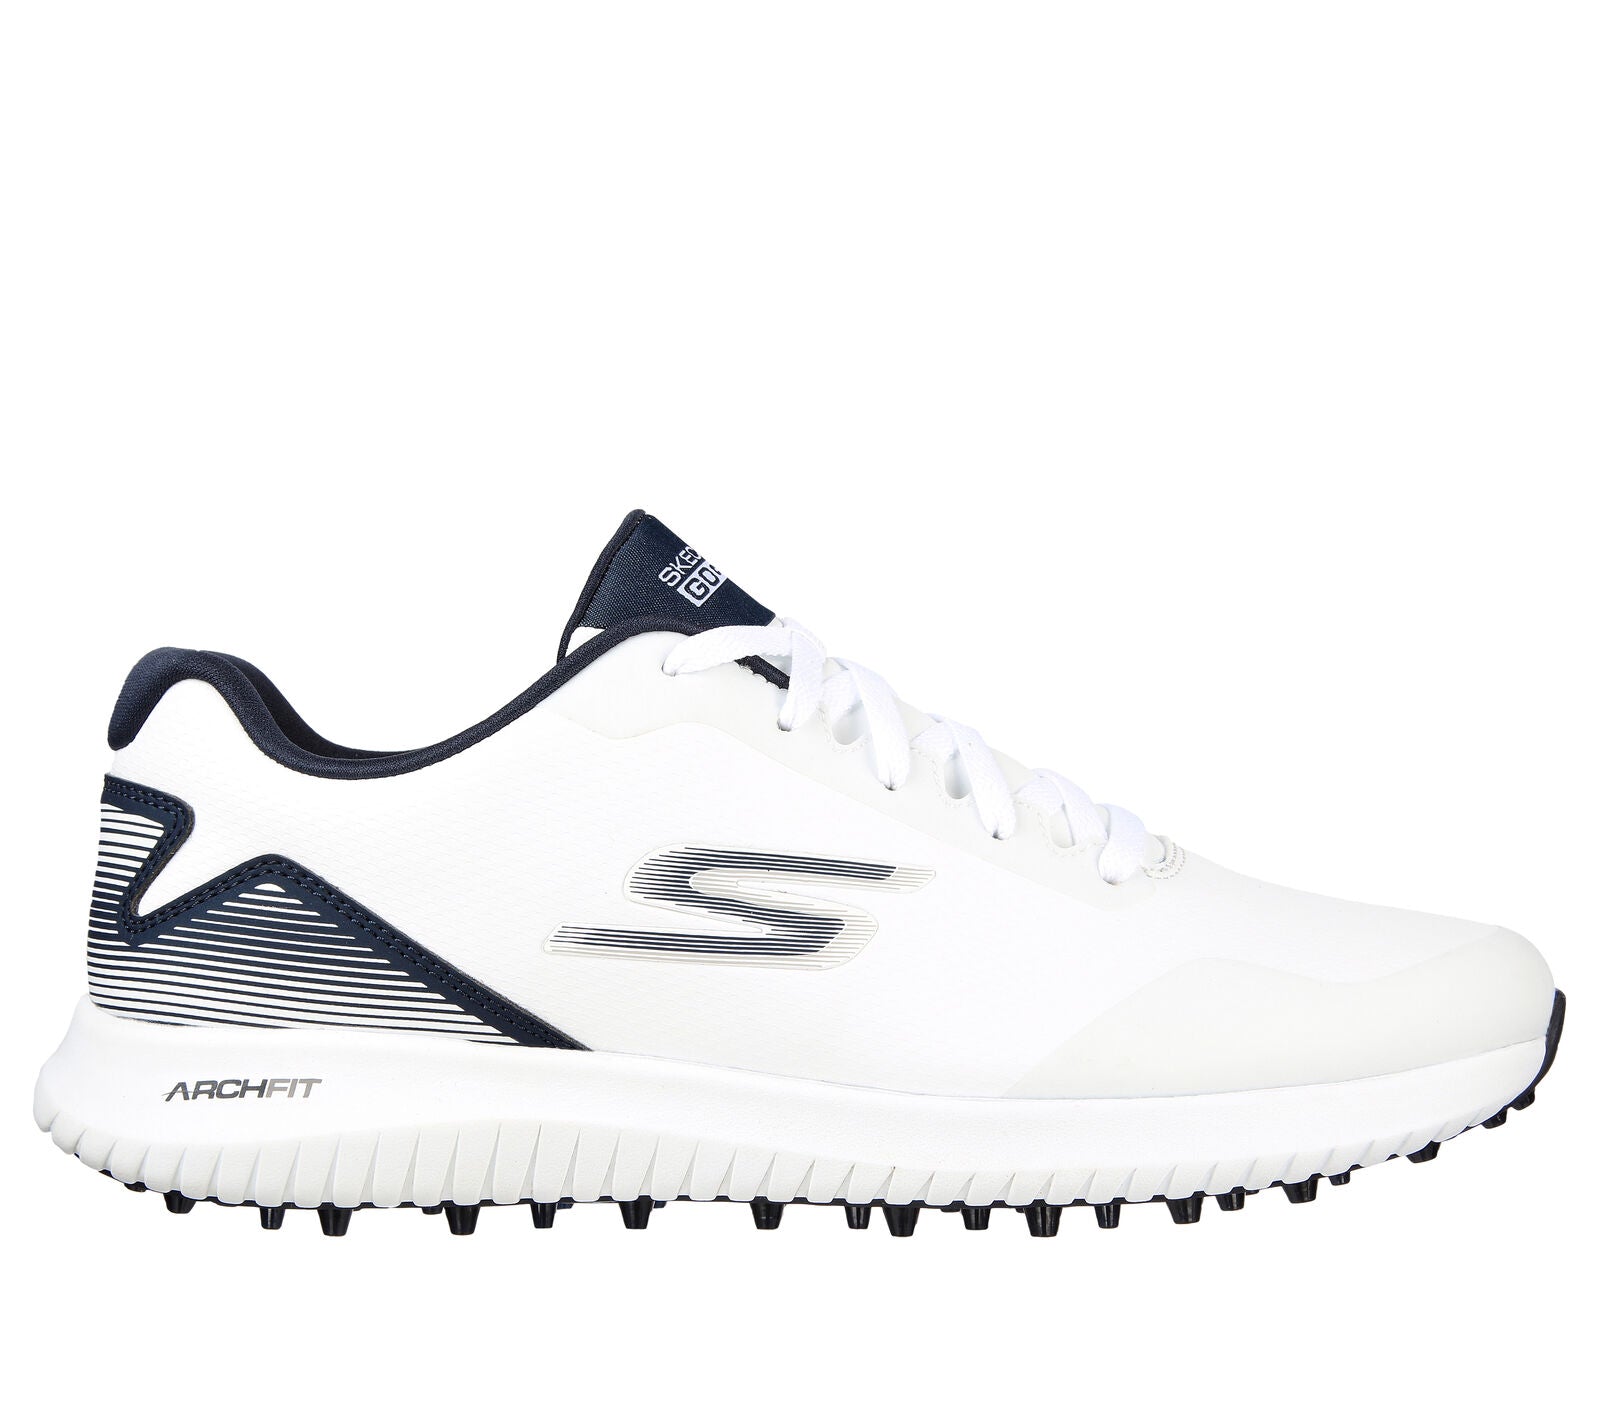 Skechers Go Golf Max 2 Golf Shoes